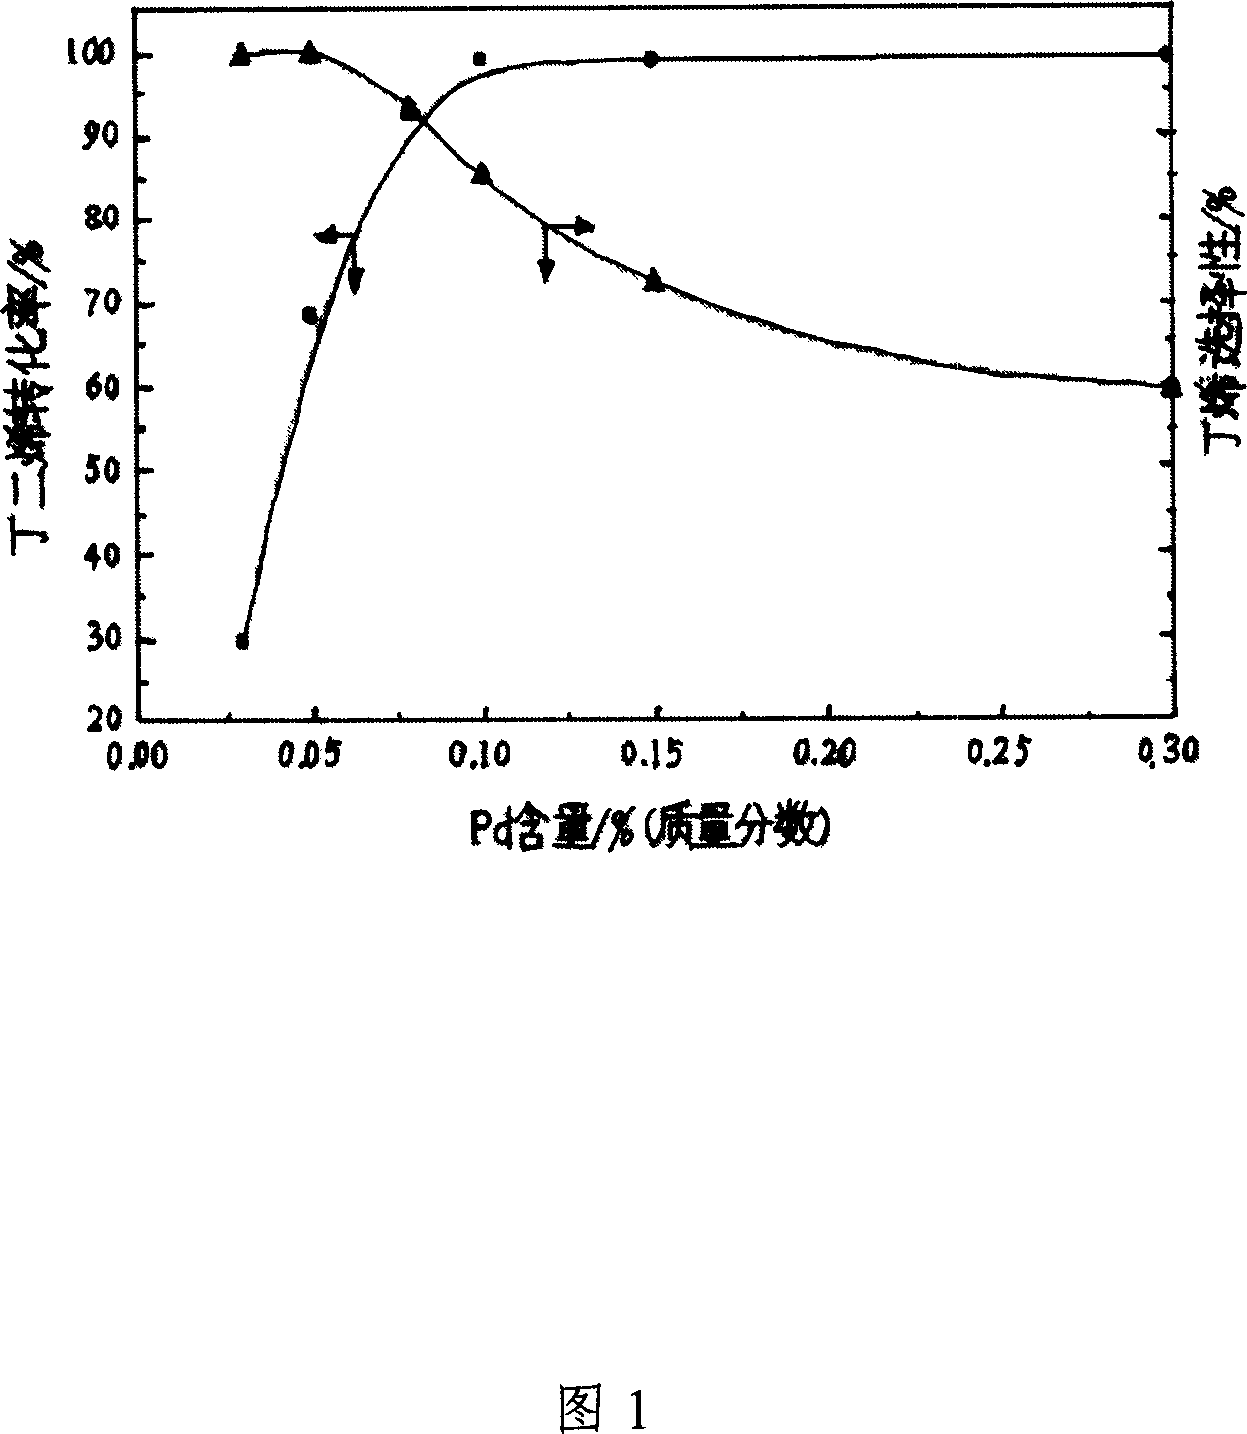 Pd radicel duplex metal selective hydrogenation catalyzer and method for preparing the same and application thereof